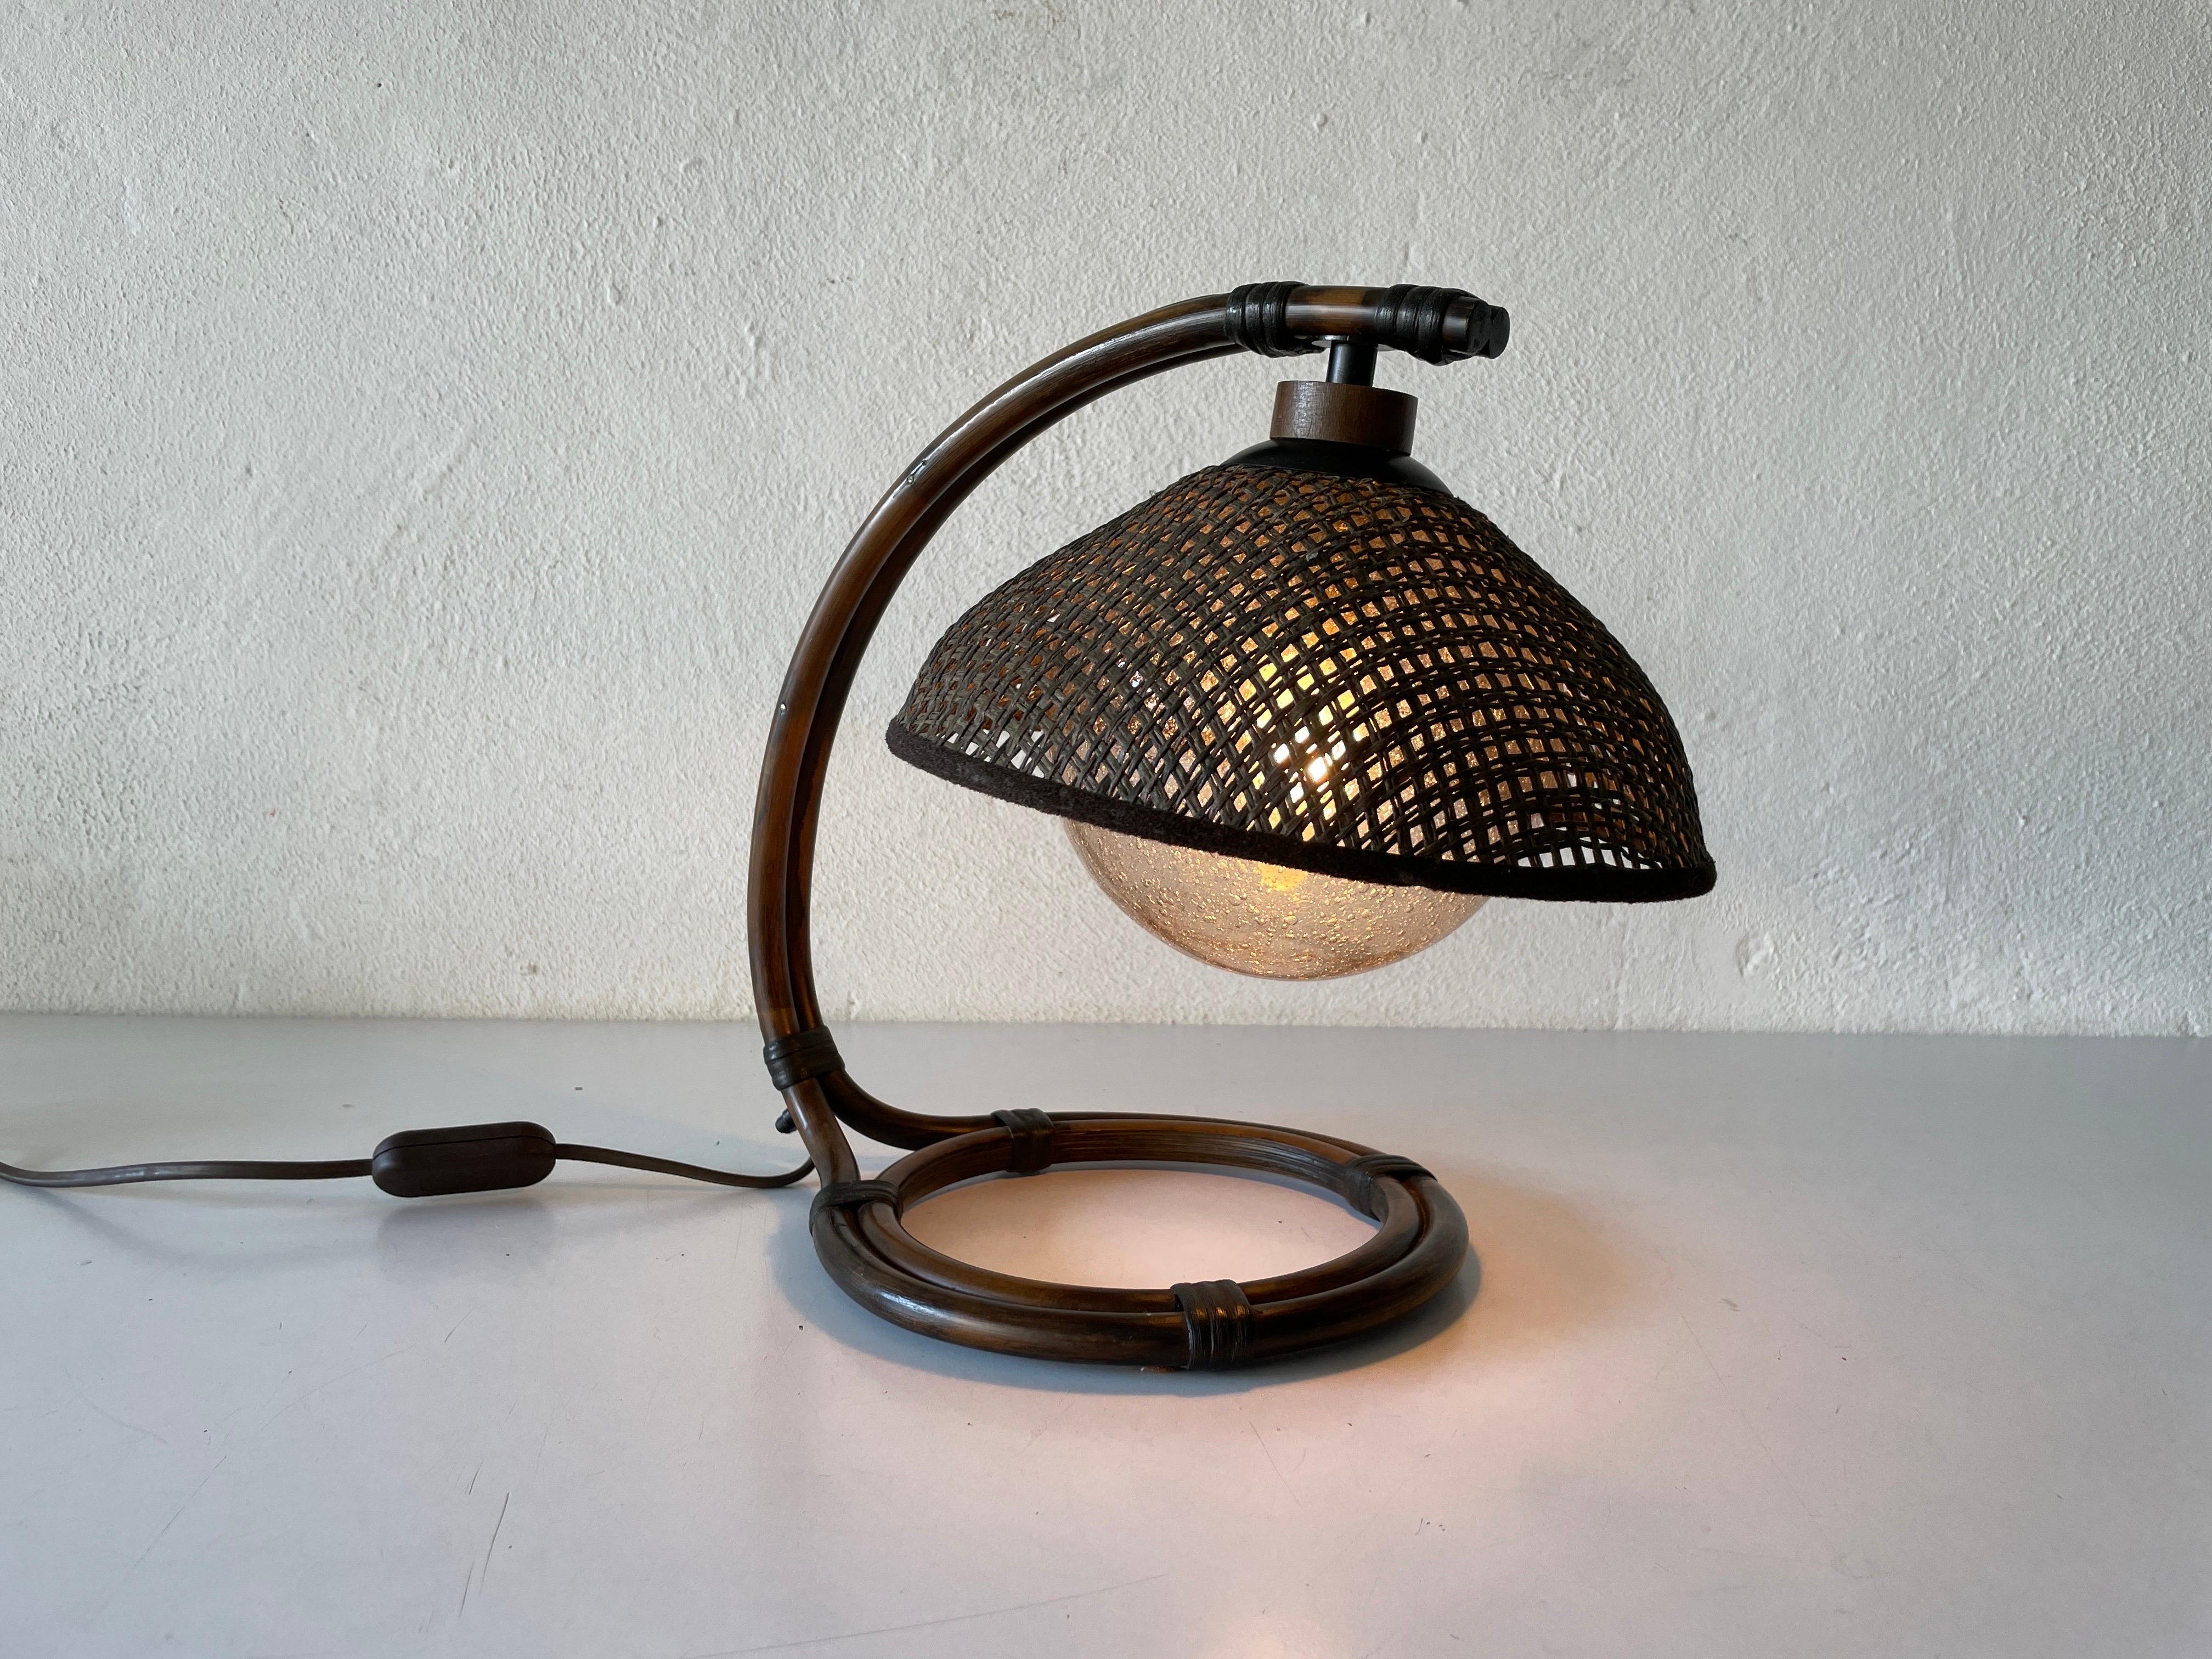 Rare Bamboo & Wicker Bedside Lamp Air Bubble Glass by Temde, 1960s, Switzerland For Sale 5